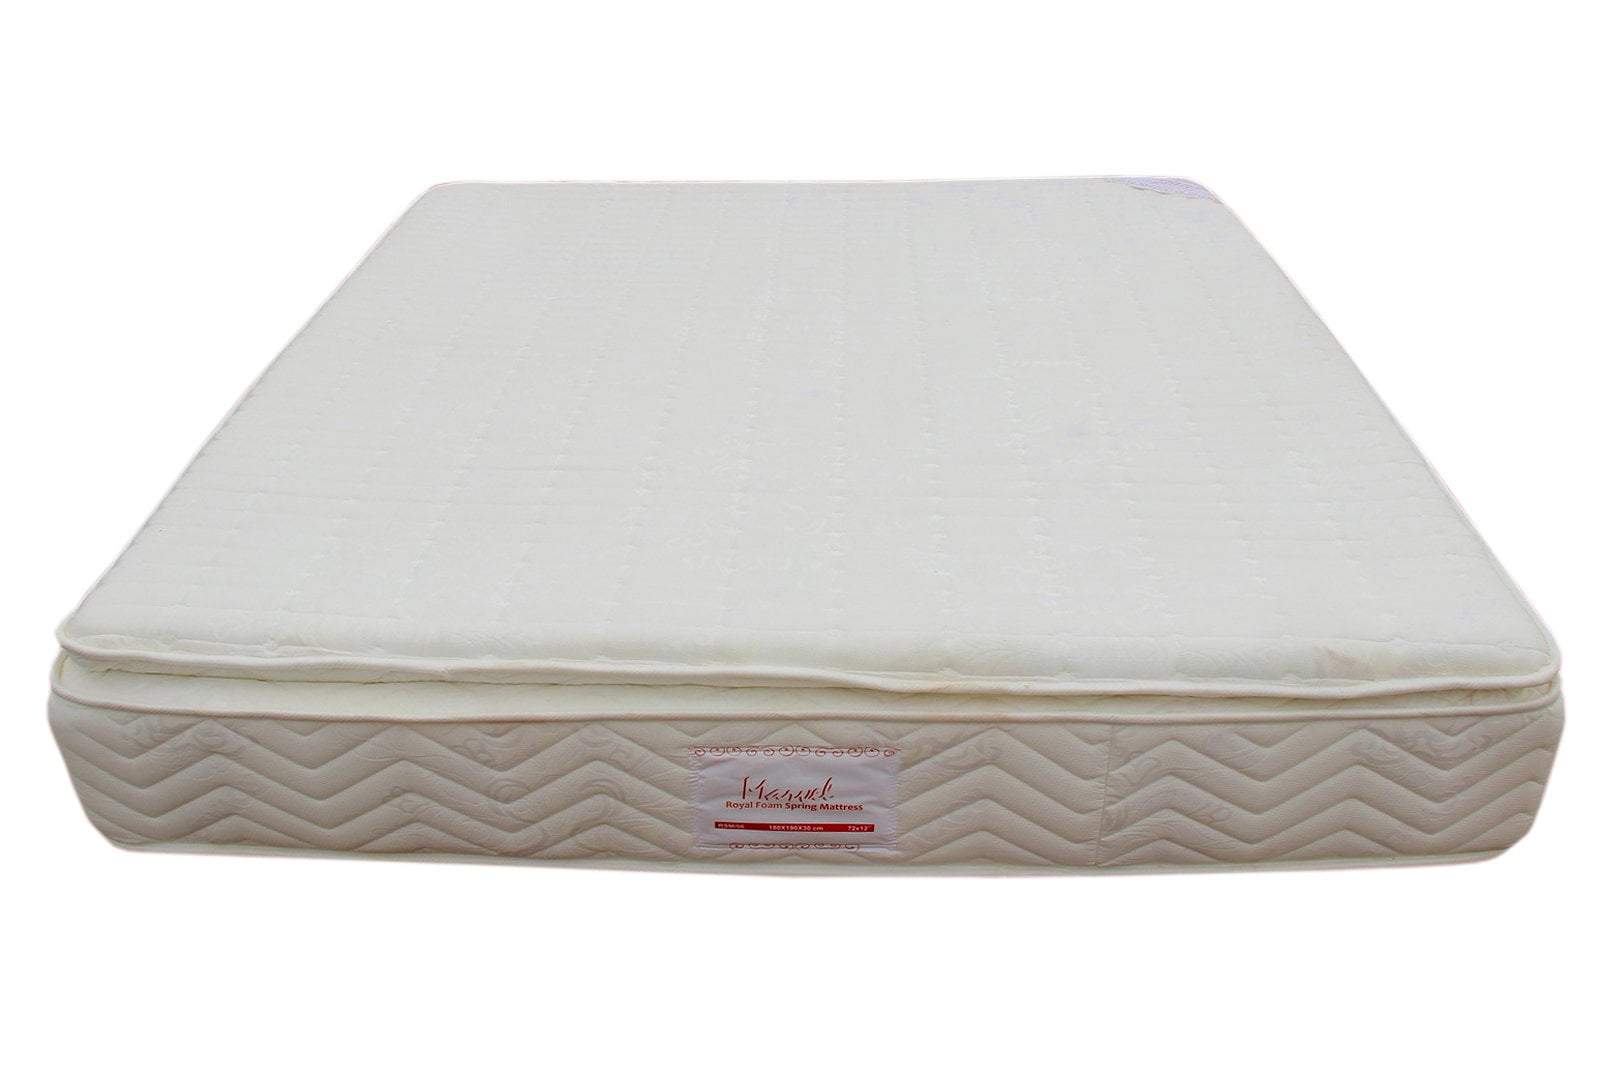 Royal Marvel Spring JACQUARD-Fully Quilted Mattress